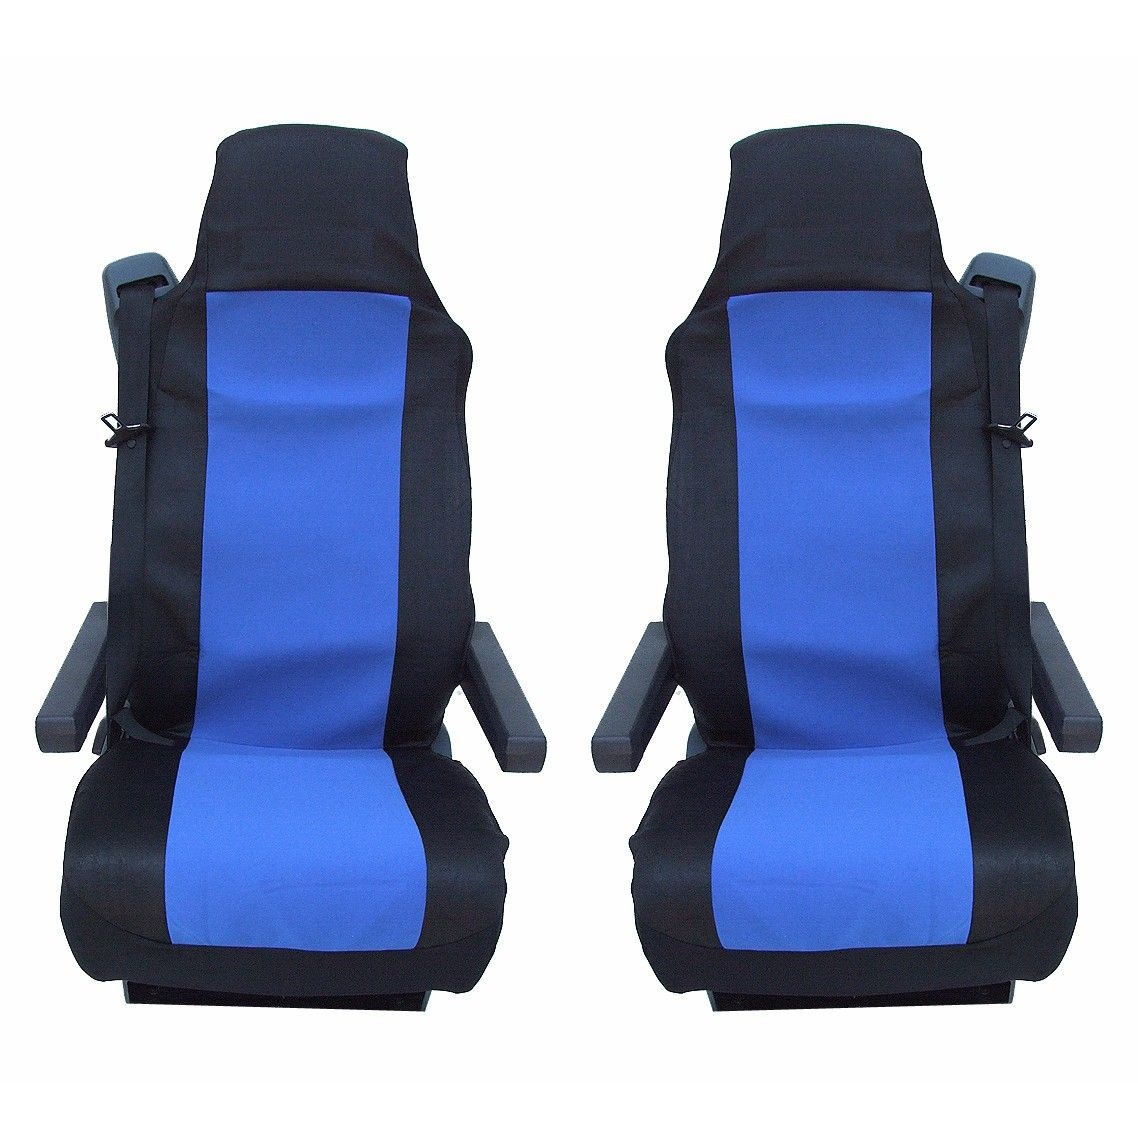 2 x Seat covers for SCANIA 4 114,124,144,164,94 Truck Black Blue Textile